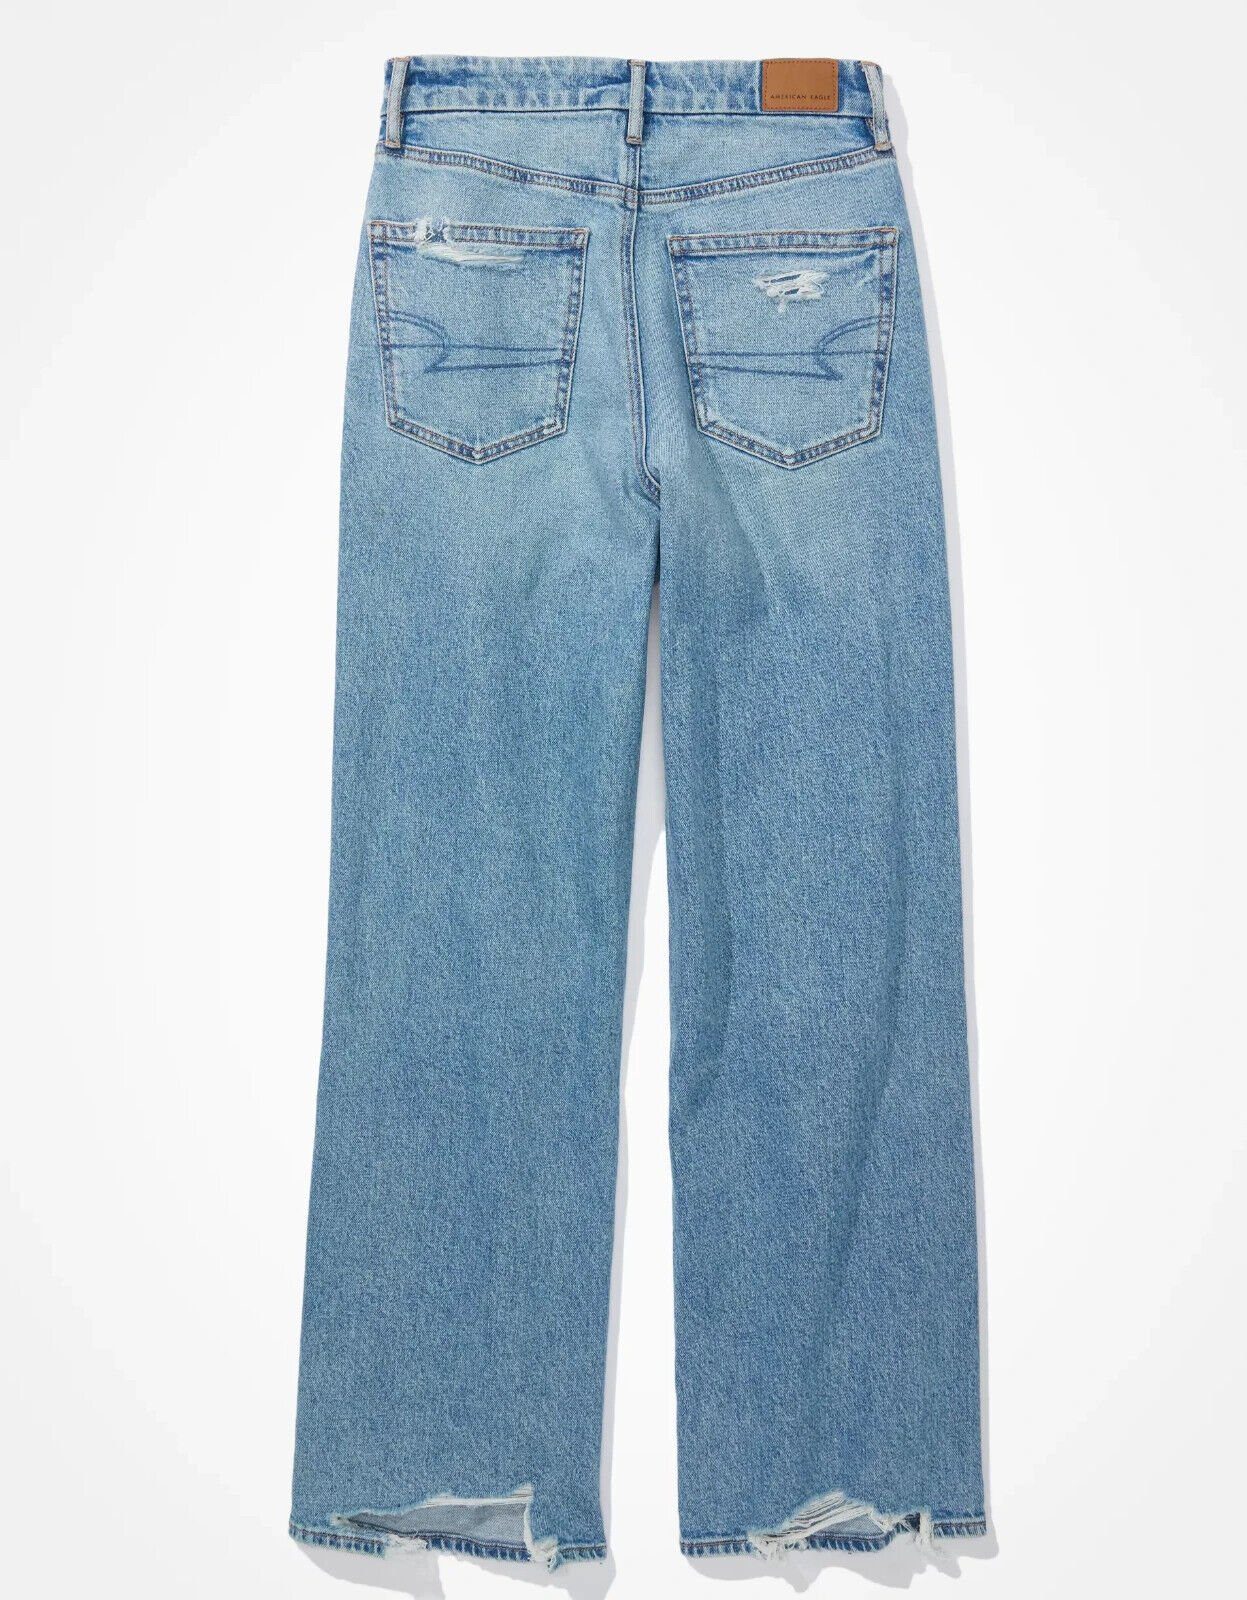 UE High-waist-Jeans High-Waisted AE Baggy Stretch Stock Straight Super Jeans Curvy